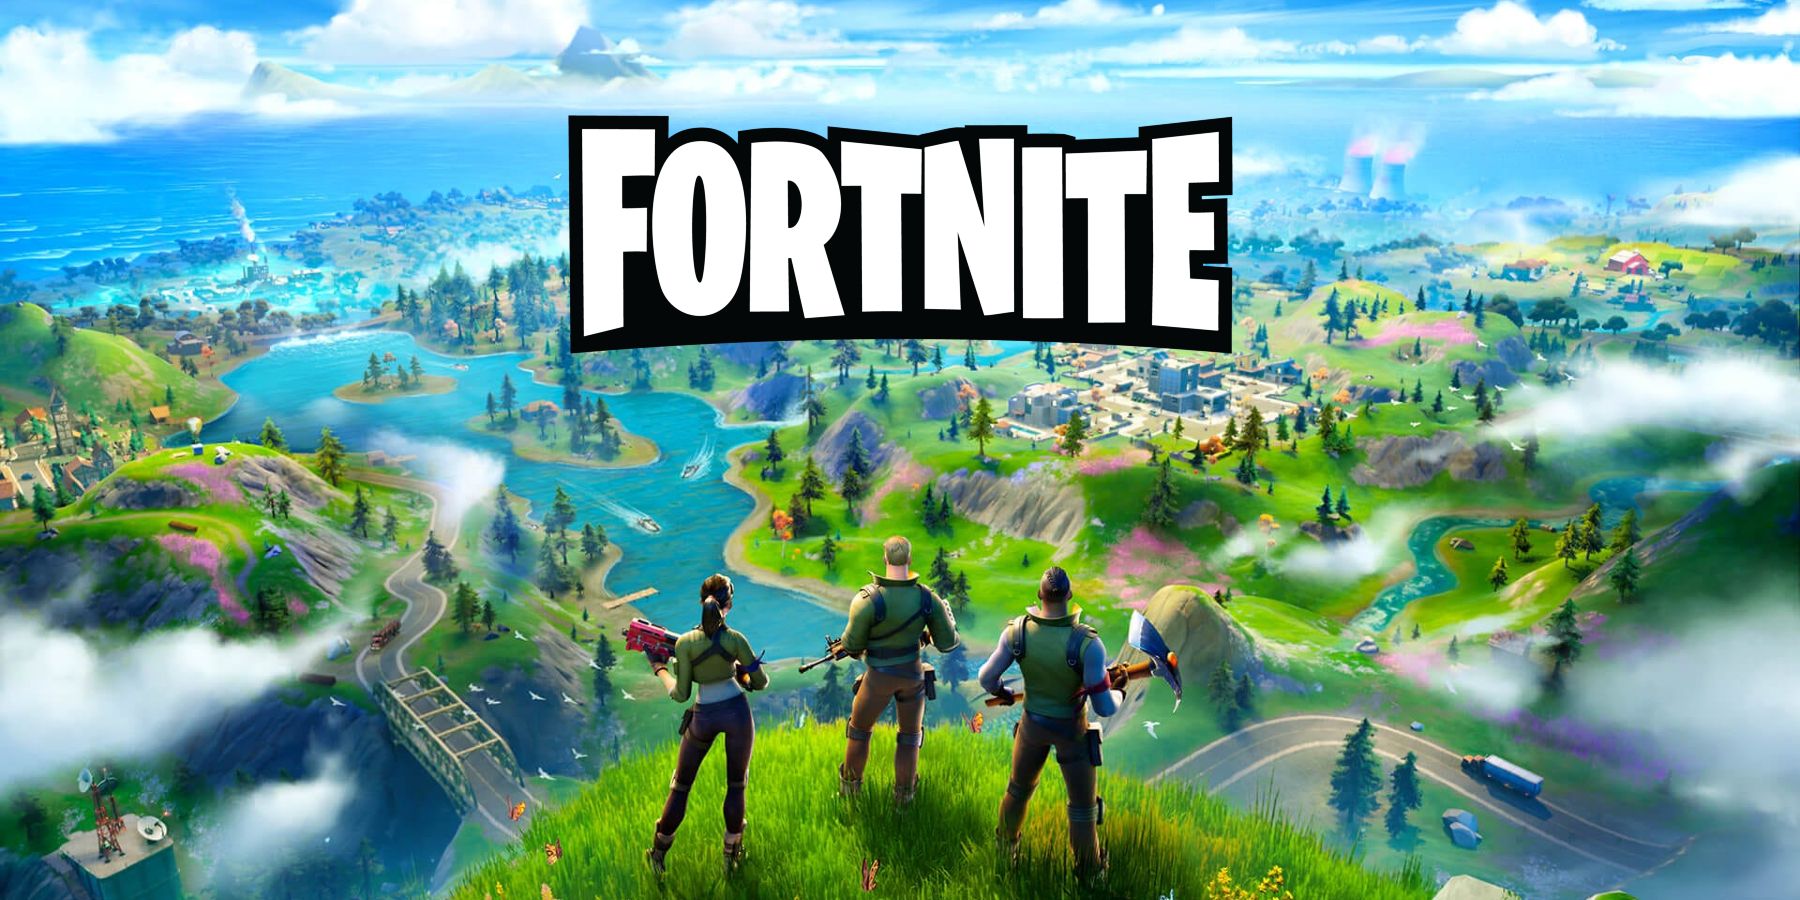 had a dream that the next fortnite season got leaked and this was